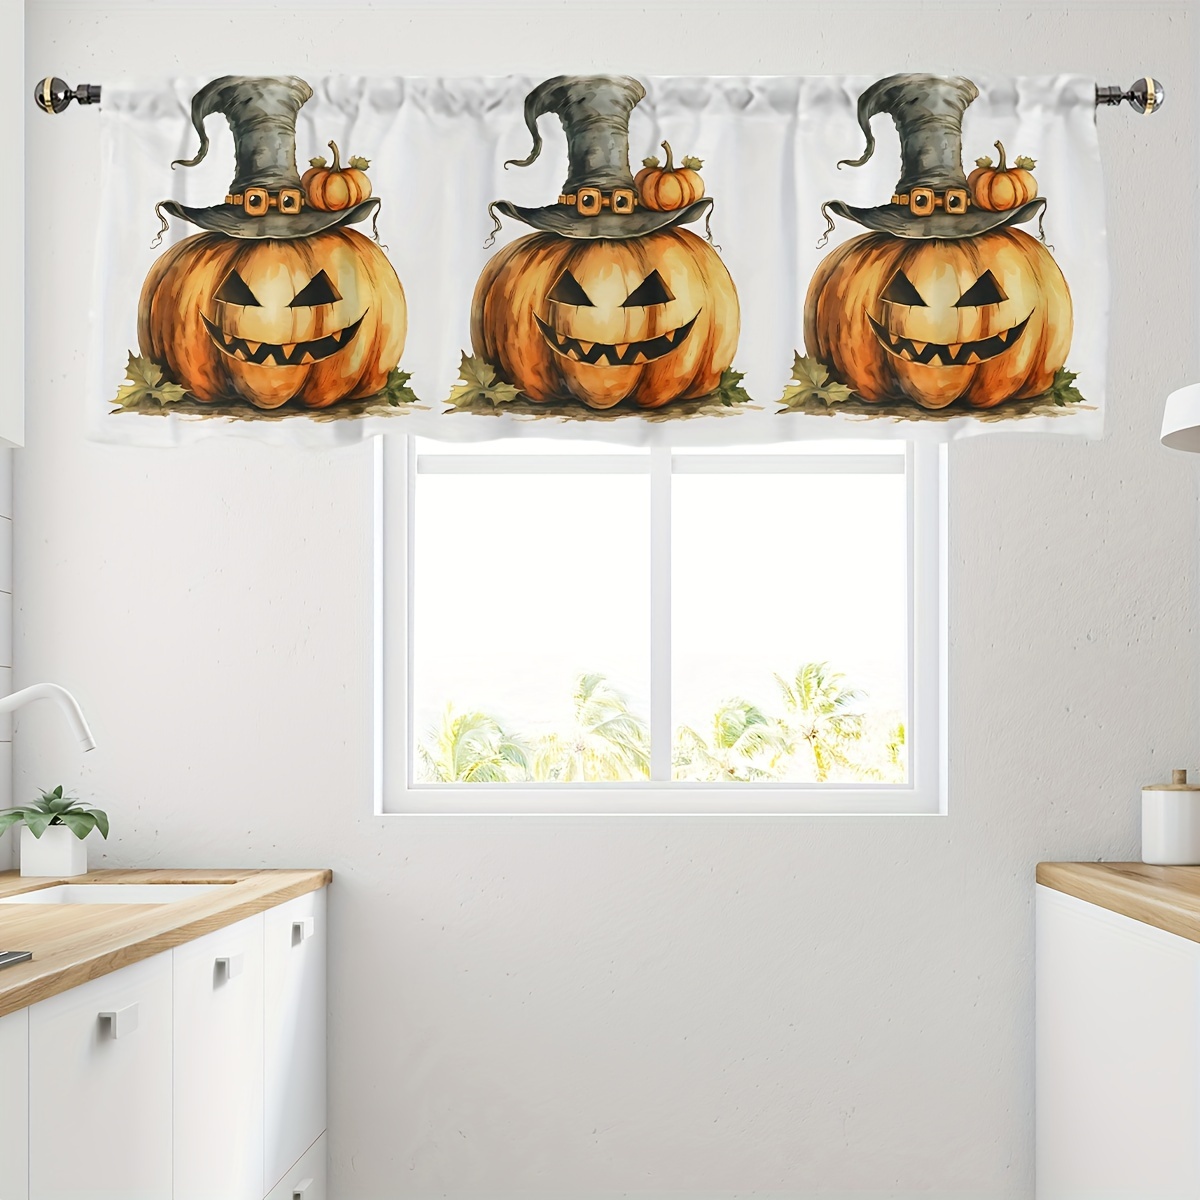 

1pc Halloween Pumpkin Valance Curtain - Classic Style Semi-sheer Rod Pocket Curtain For Various Rooms, Hand Washable Polyester Weave With Design, Decorative Arts Theme For Kitchen & Home